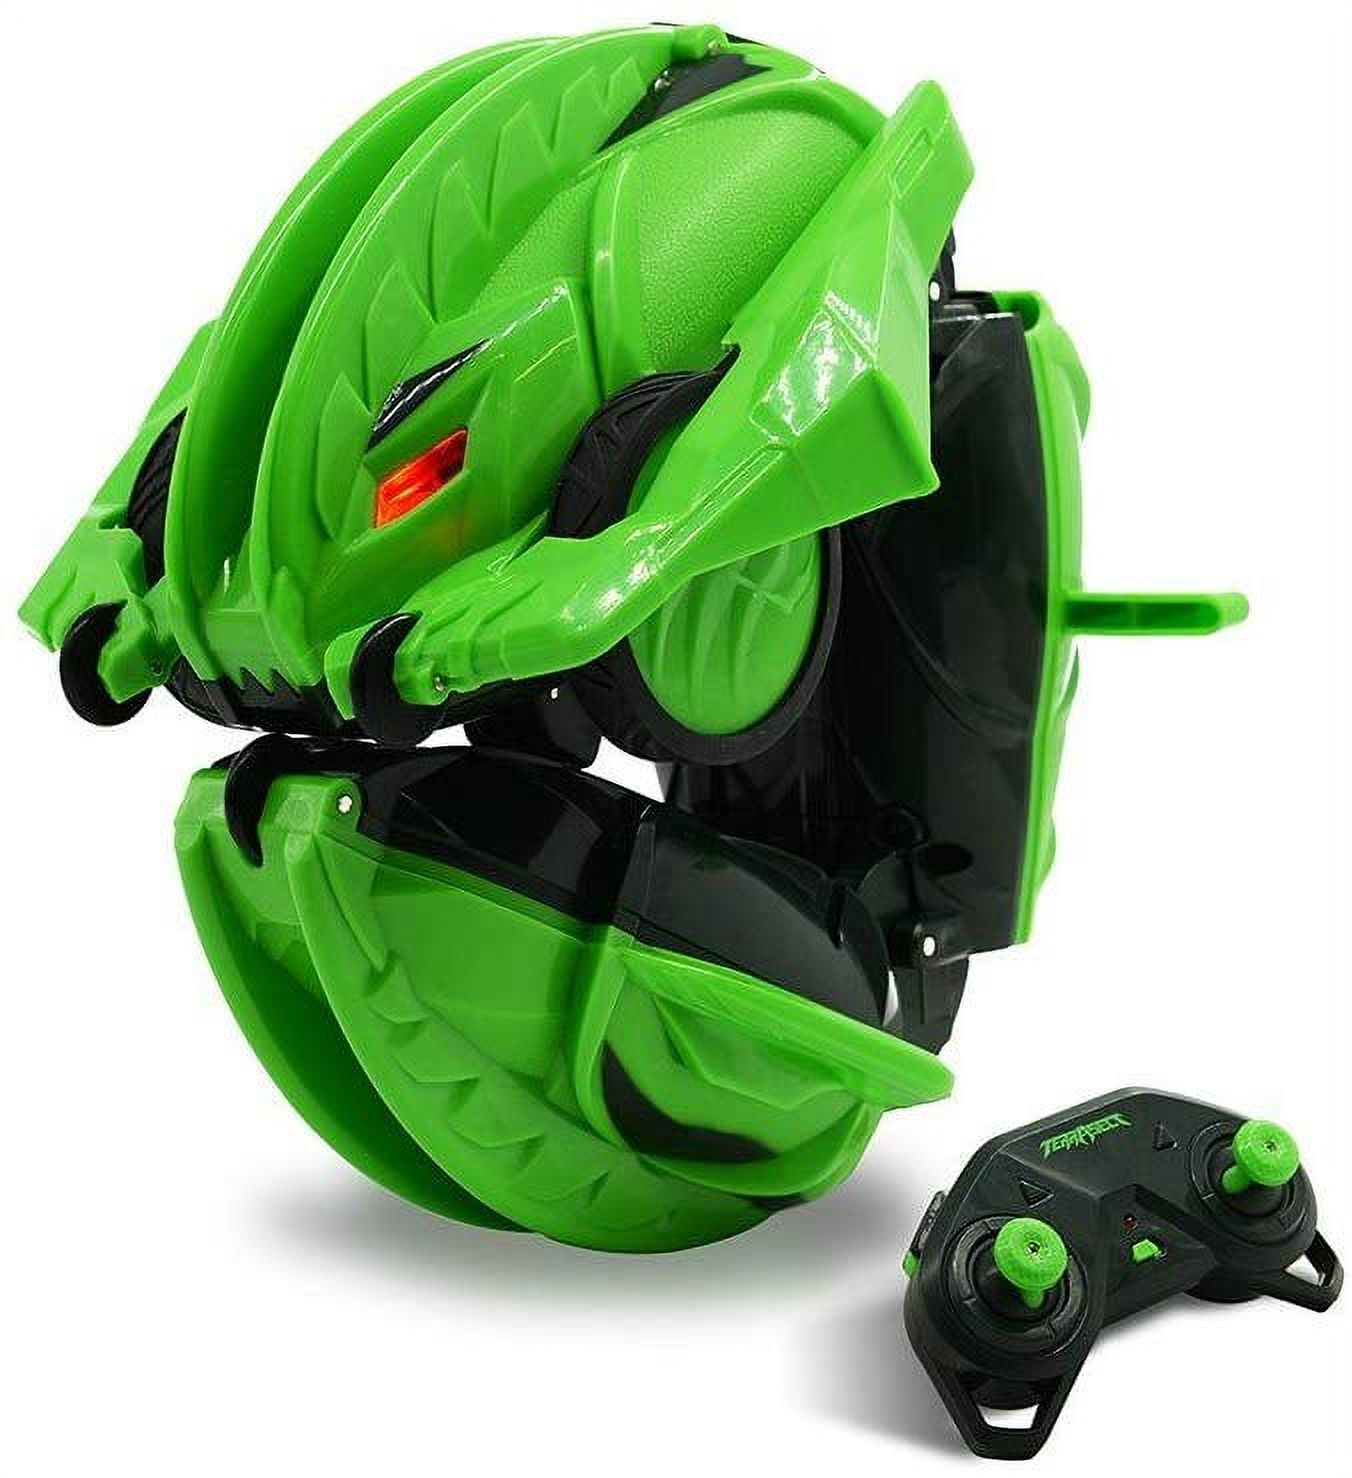 Terrasect Remote Control Transforming Vehicle, Green, 2.4 Ghz - image 1 of 9